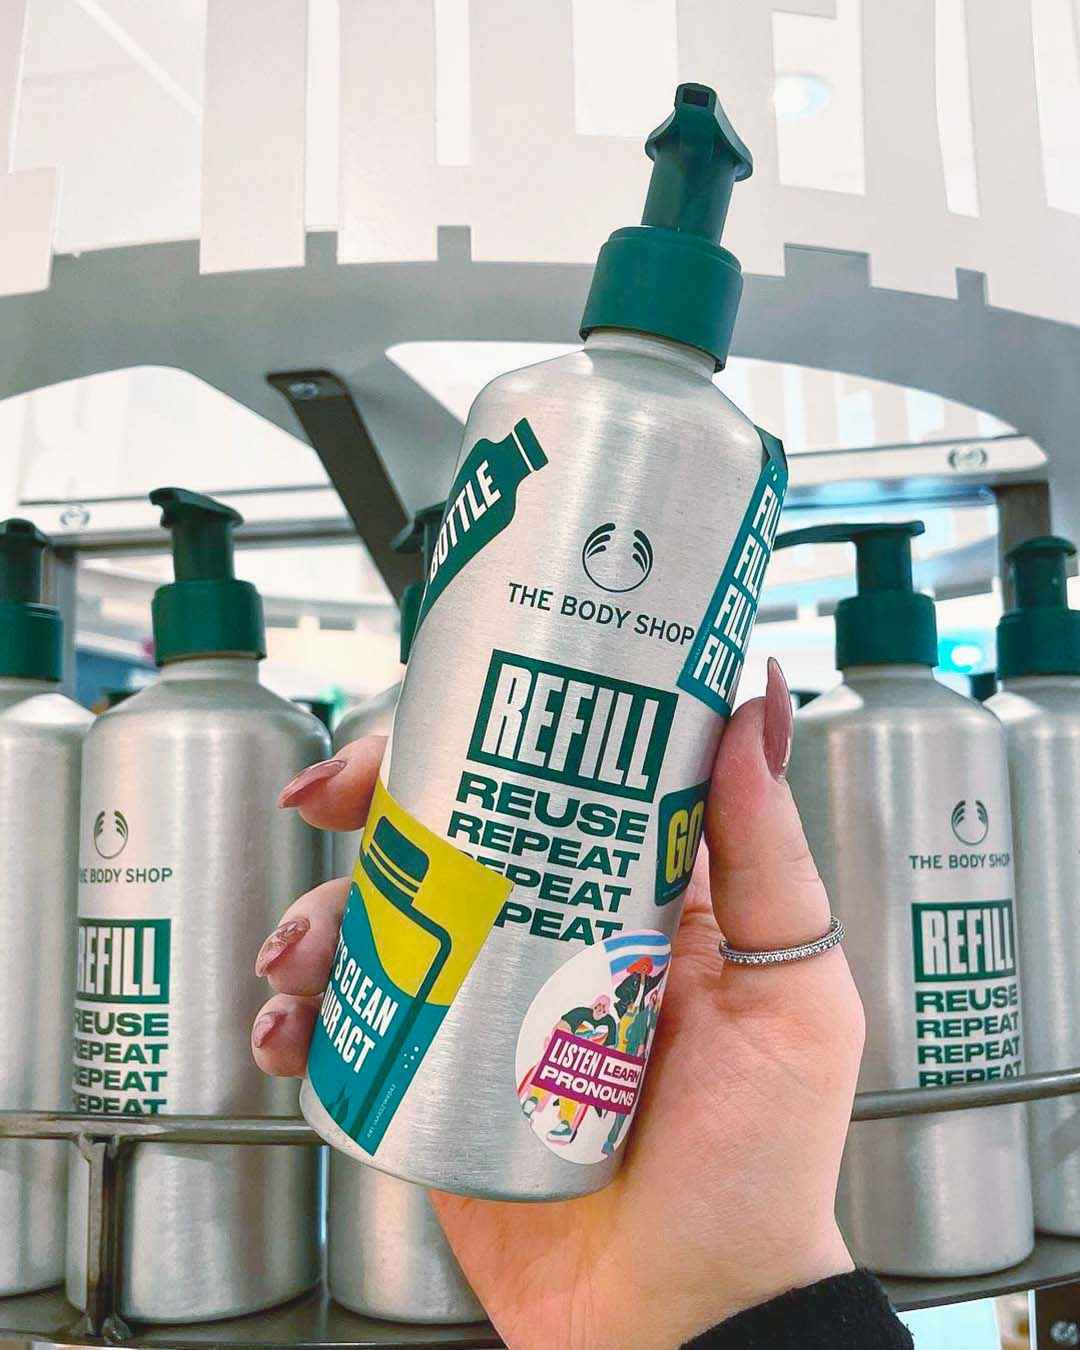 Refill bottle. The Body Shop. Earth Month. Hari Bumi. Eco friendly. Sustainability.